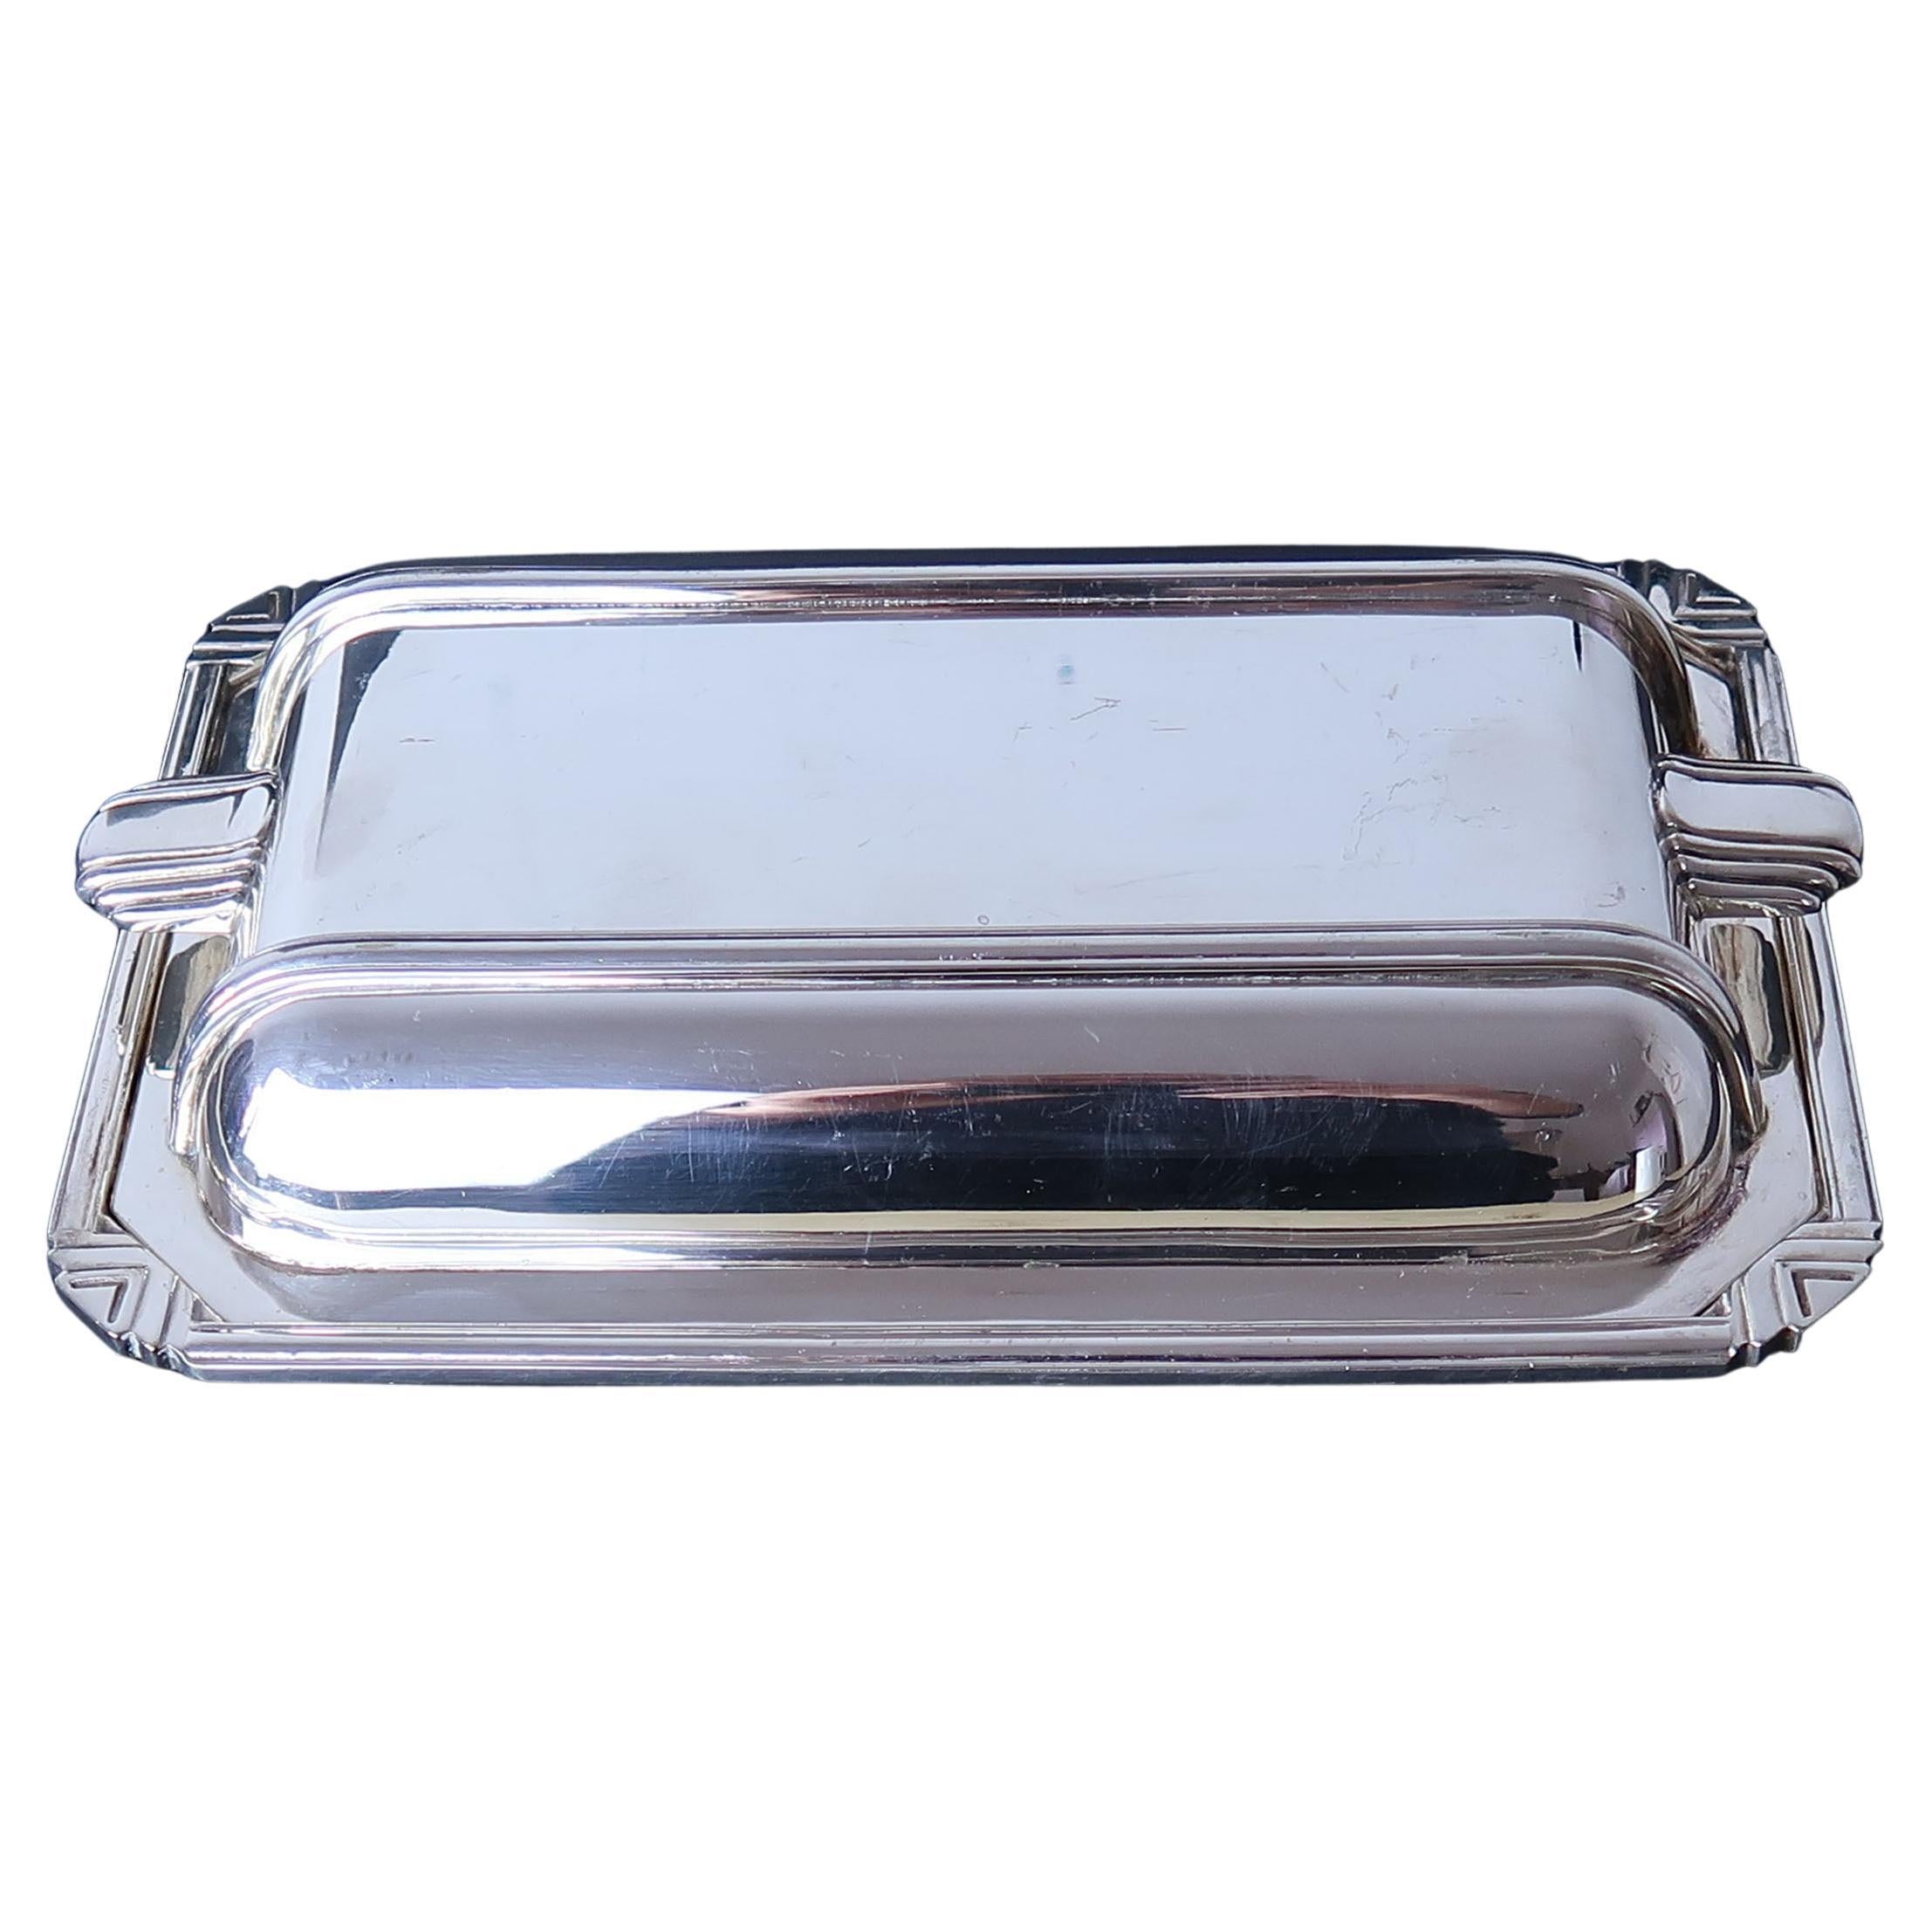 Art Deco Silver Plated Entree or Serving Dish, English C.1930